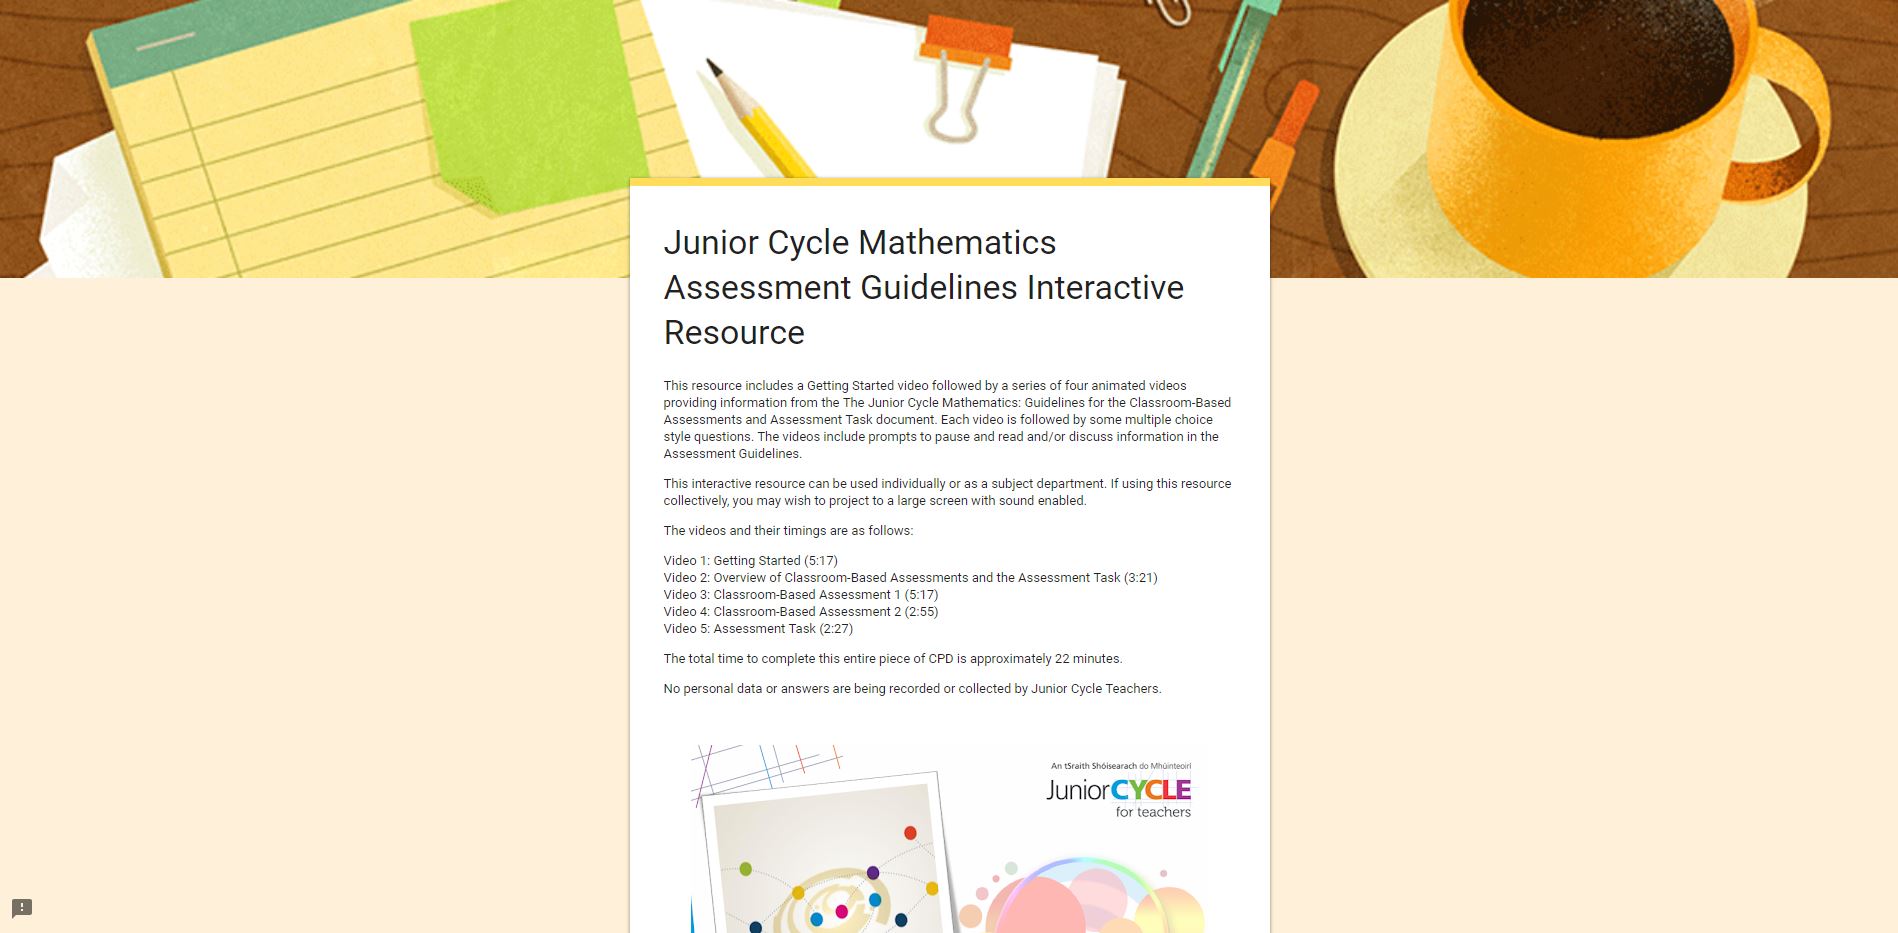 Assessment Guidelines Interactive Resource